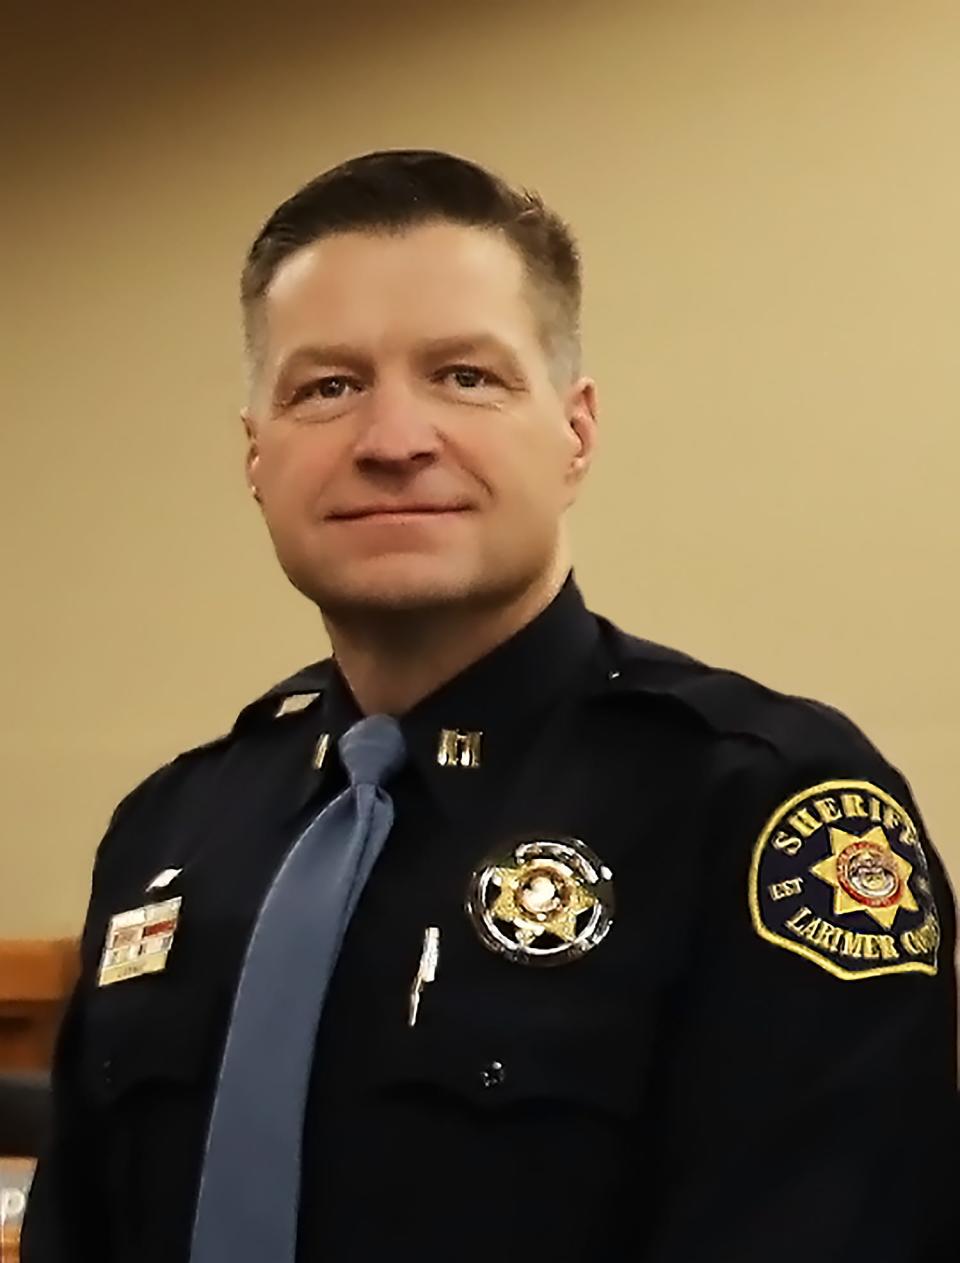 Larimer County Sheriff's Office Capt. Ian Stewart has been named interim chief at the Estes Park Police Department while the town searches for a permanent chief.